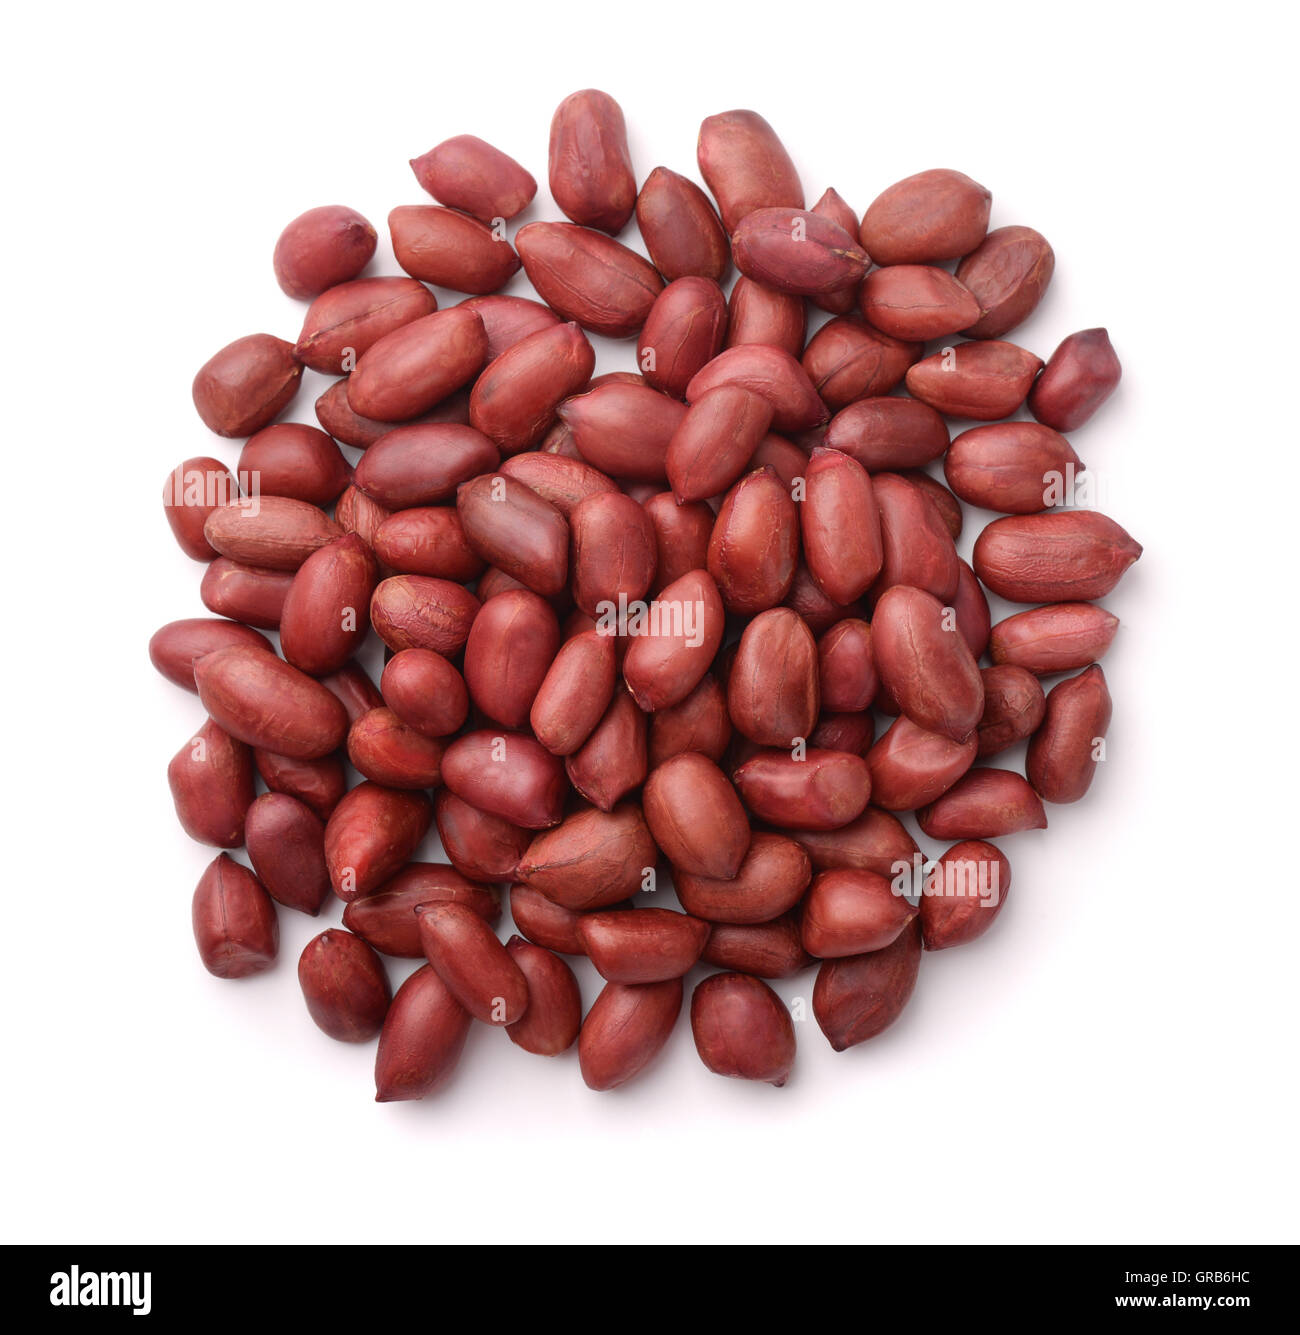 Top view of peanuts isolated on white Stock Photo